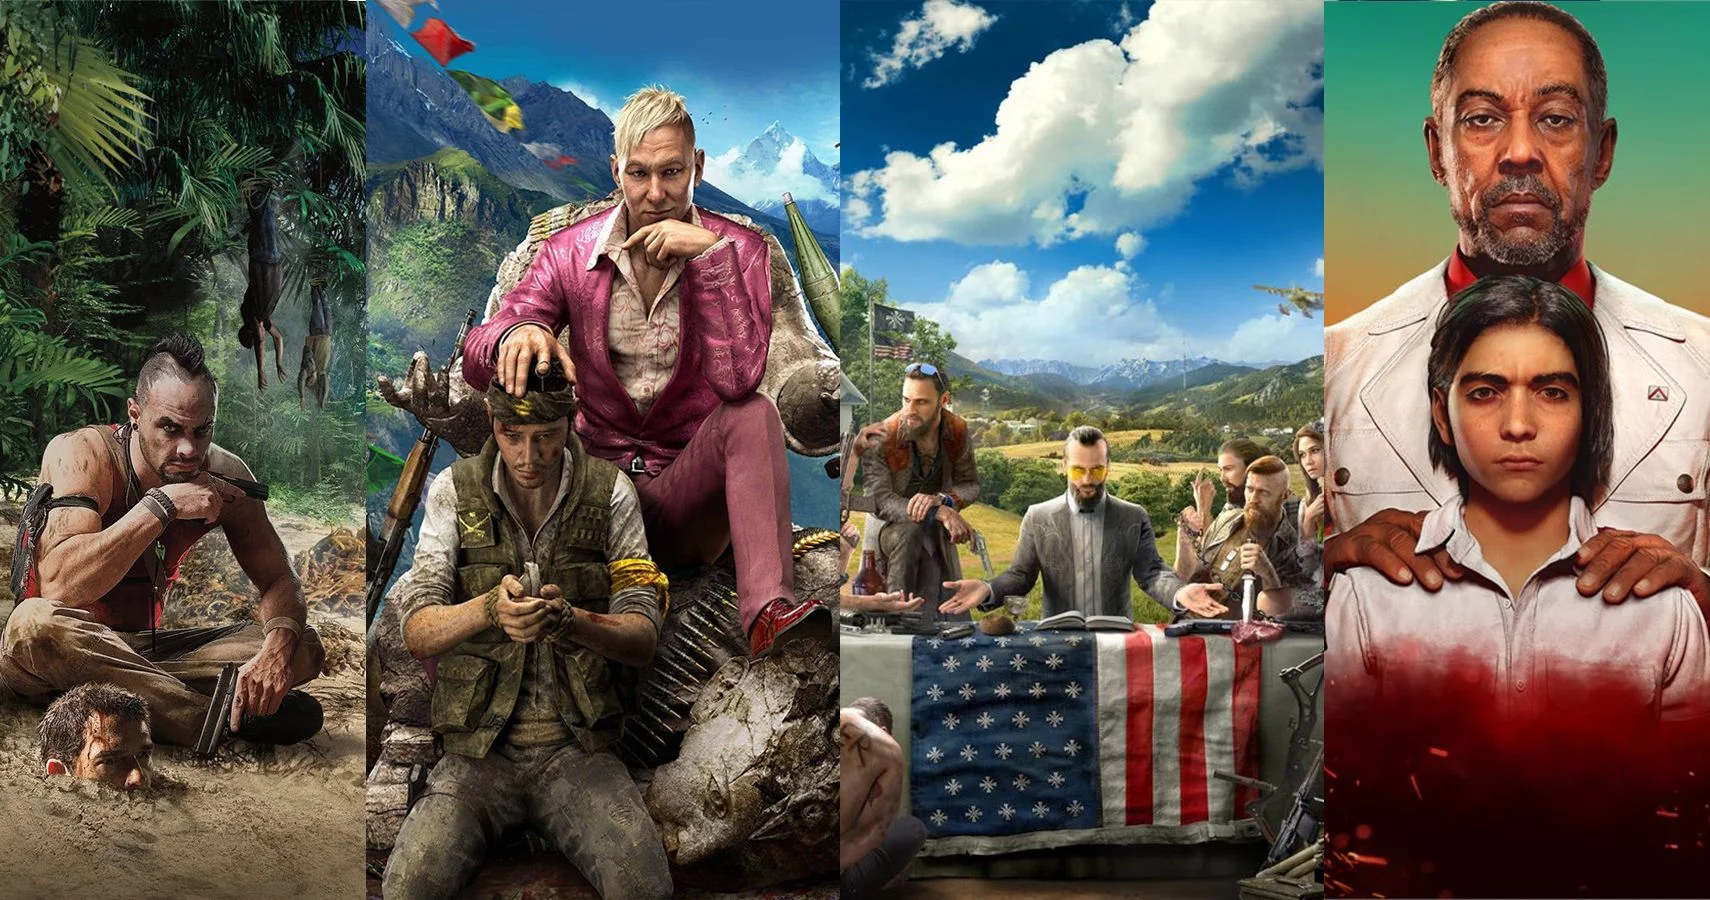 Information about Far Cry 7 has appeared